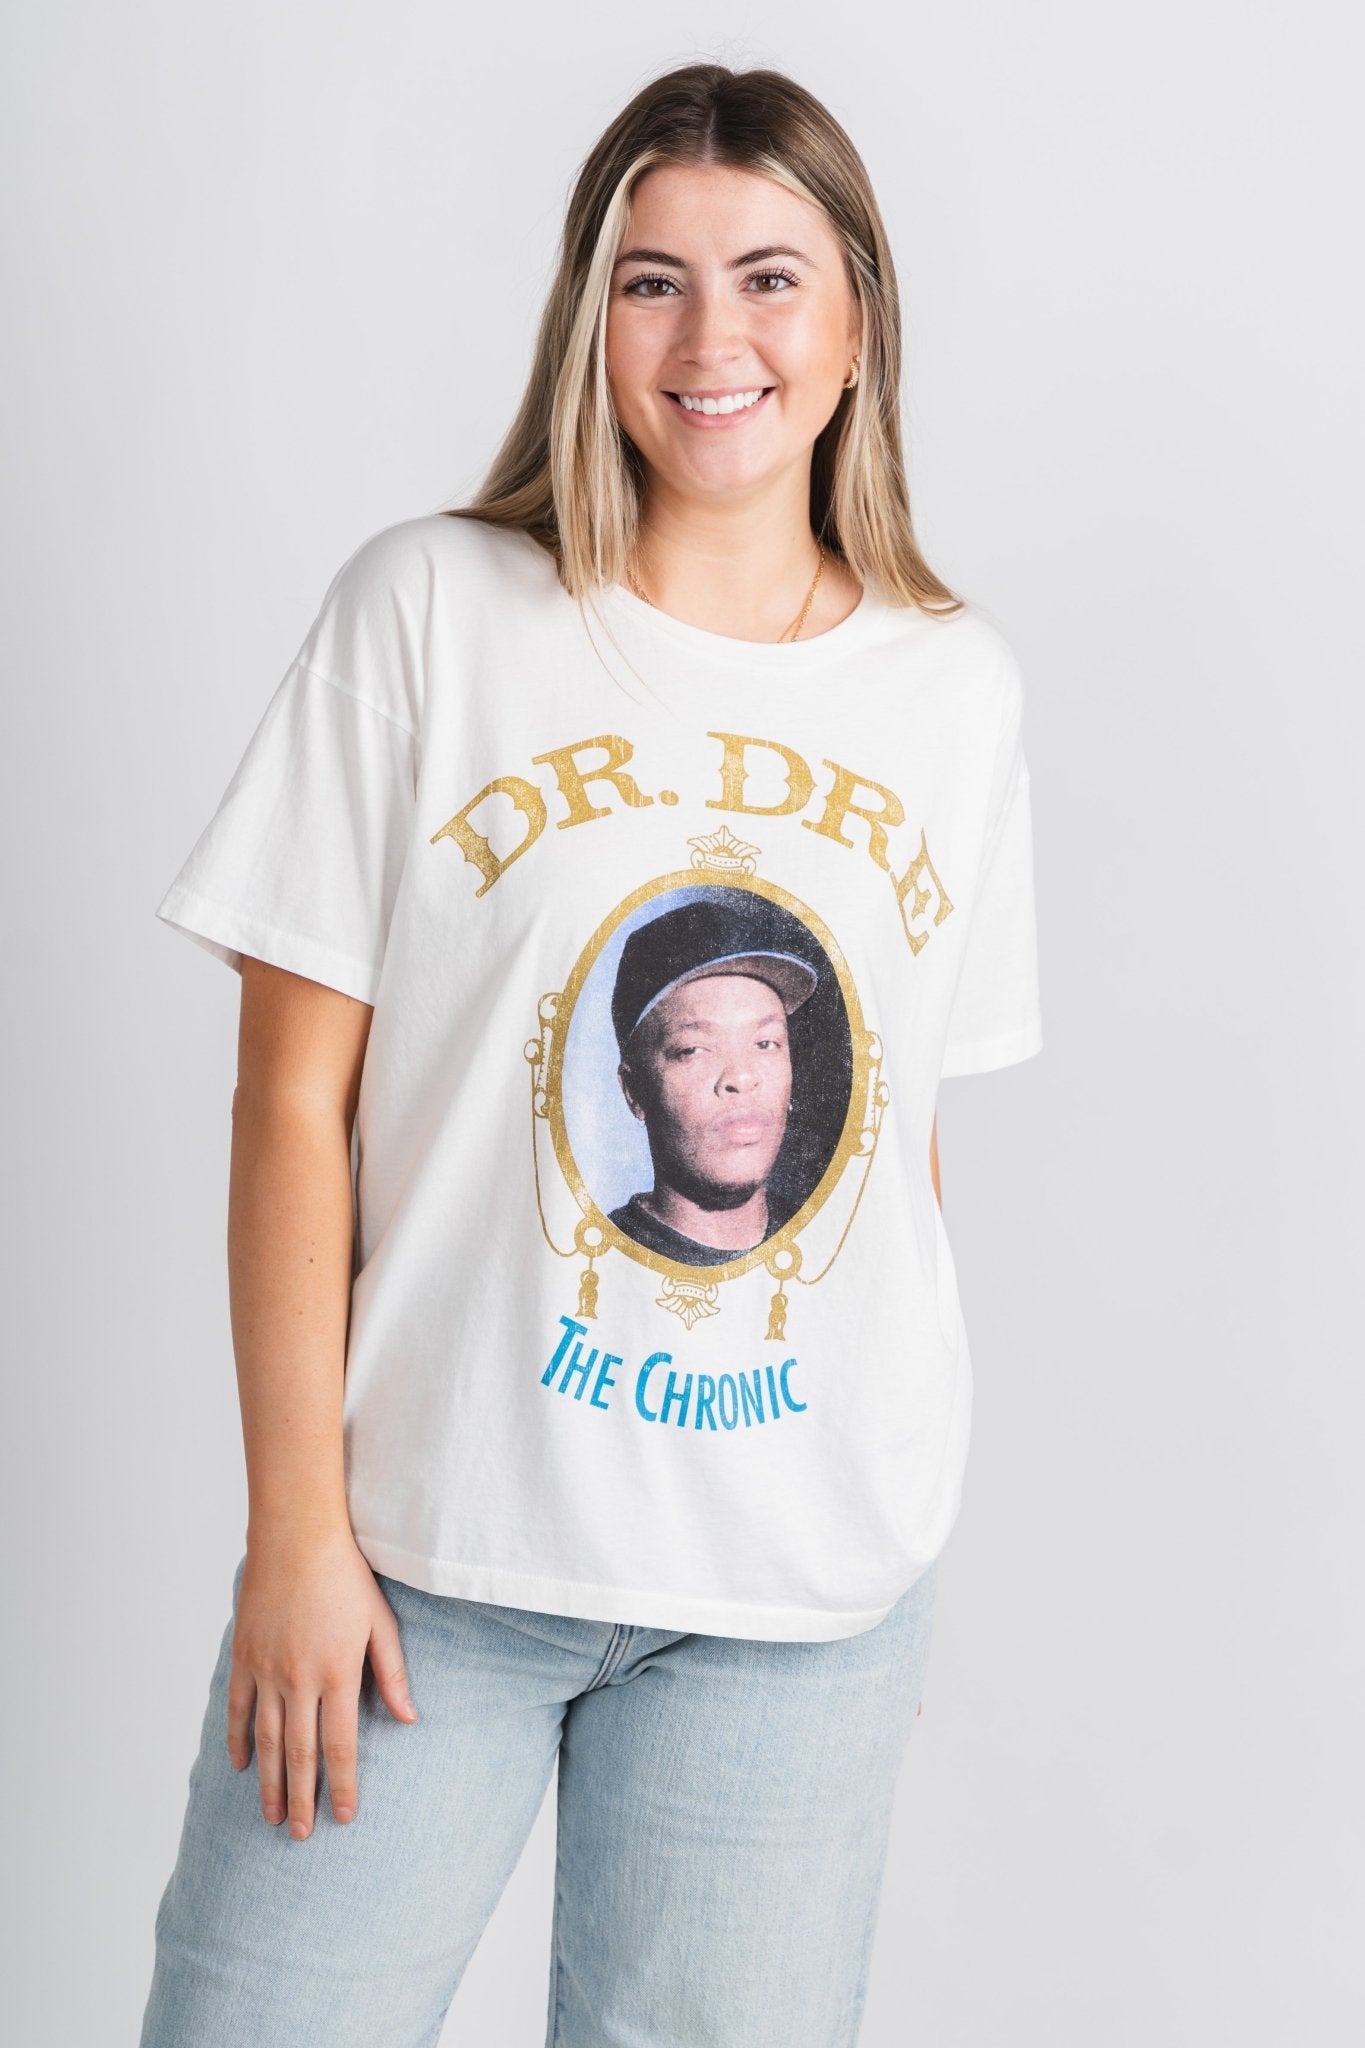 DayDreamer Dr. Dre the chronic merch t-shirt vintage white - Stylish Band T-Shirts and Sweatshirts at Lush Fashion Lounge Boutique in Oklahoma City